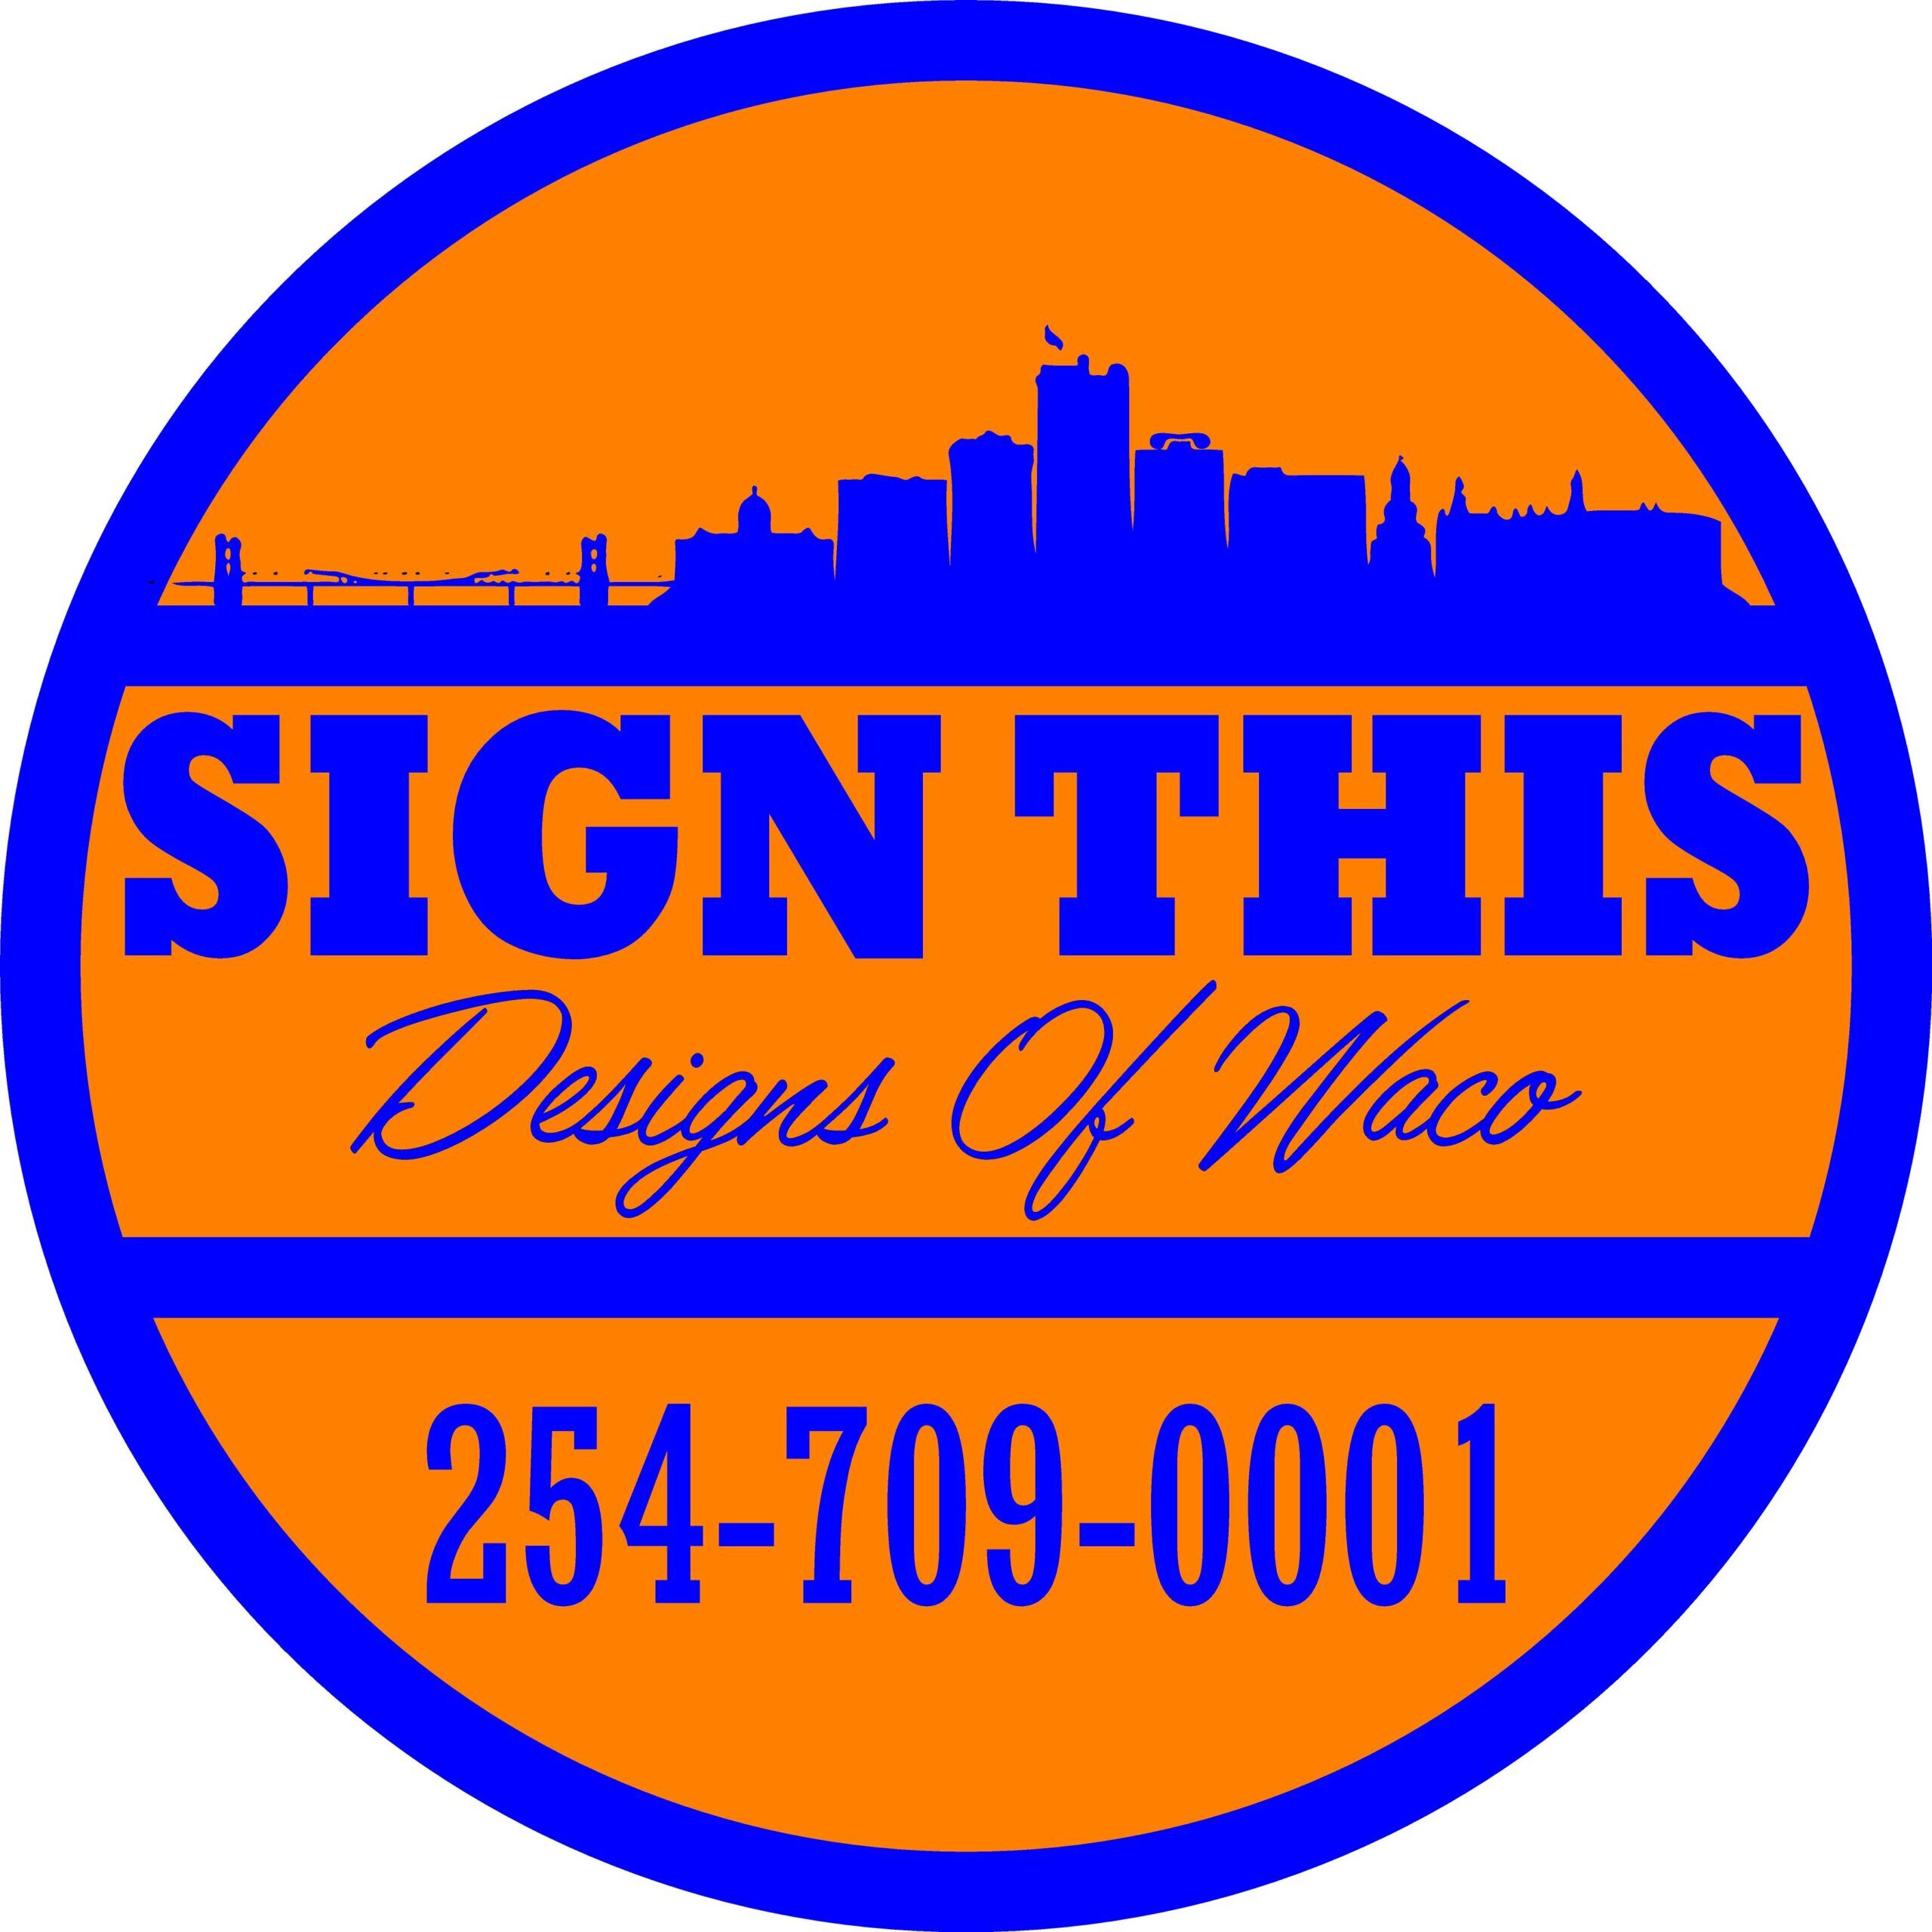 Sign This Designs of Waco!